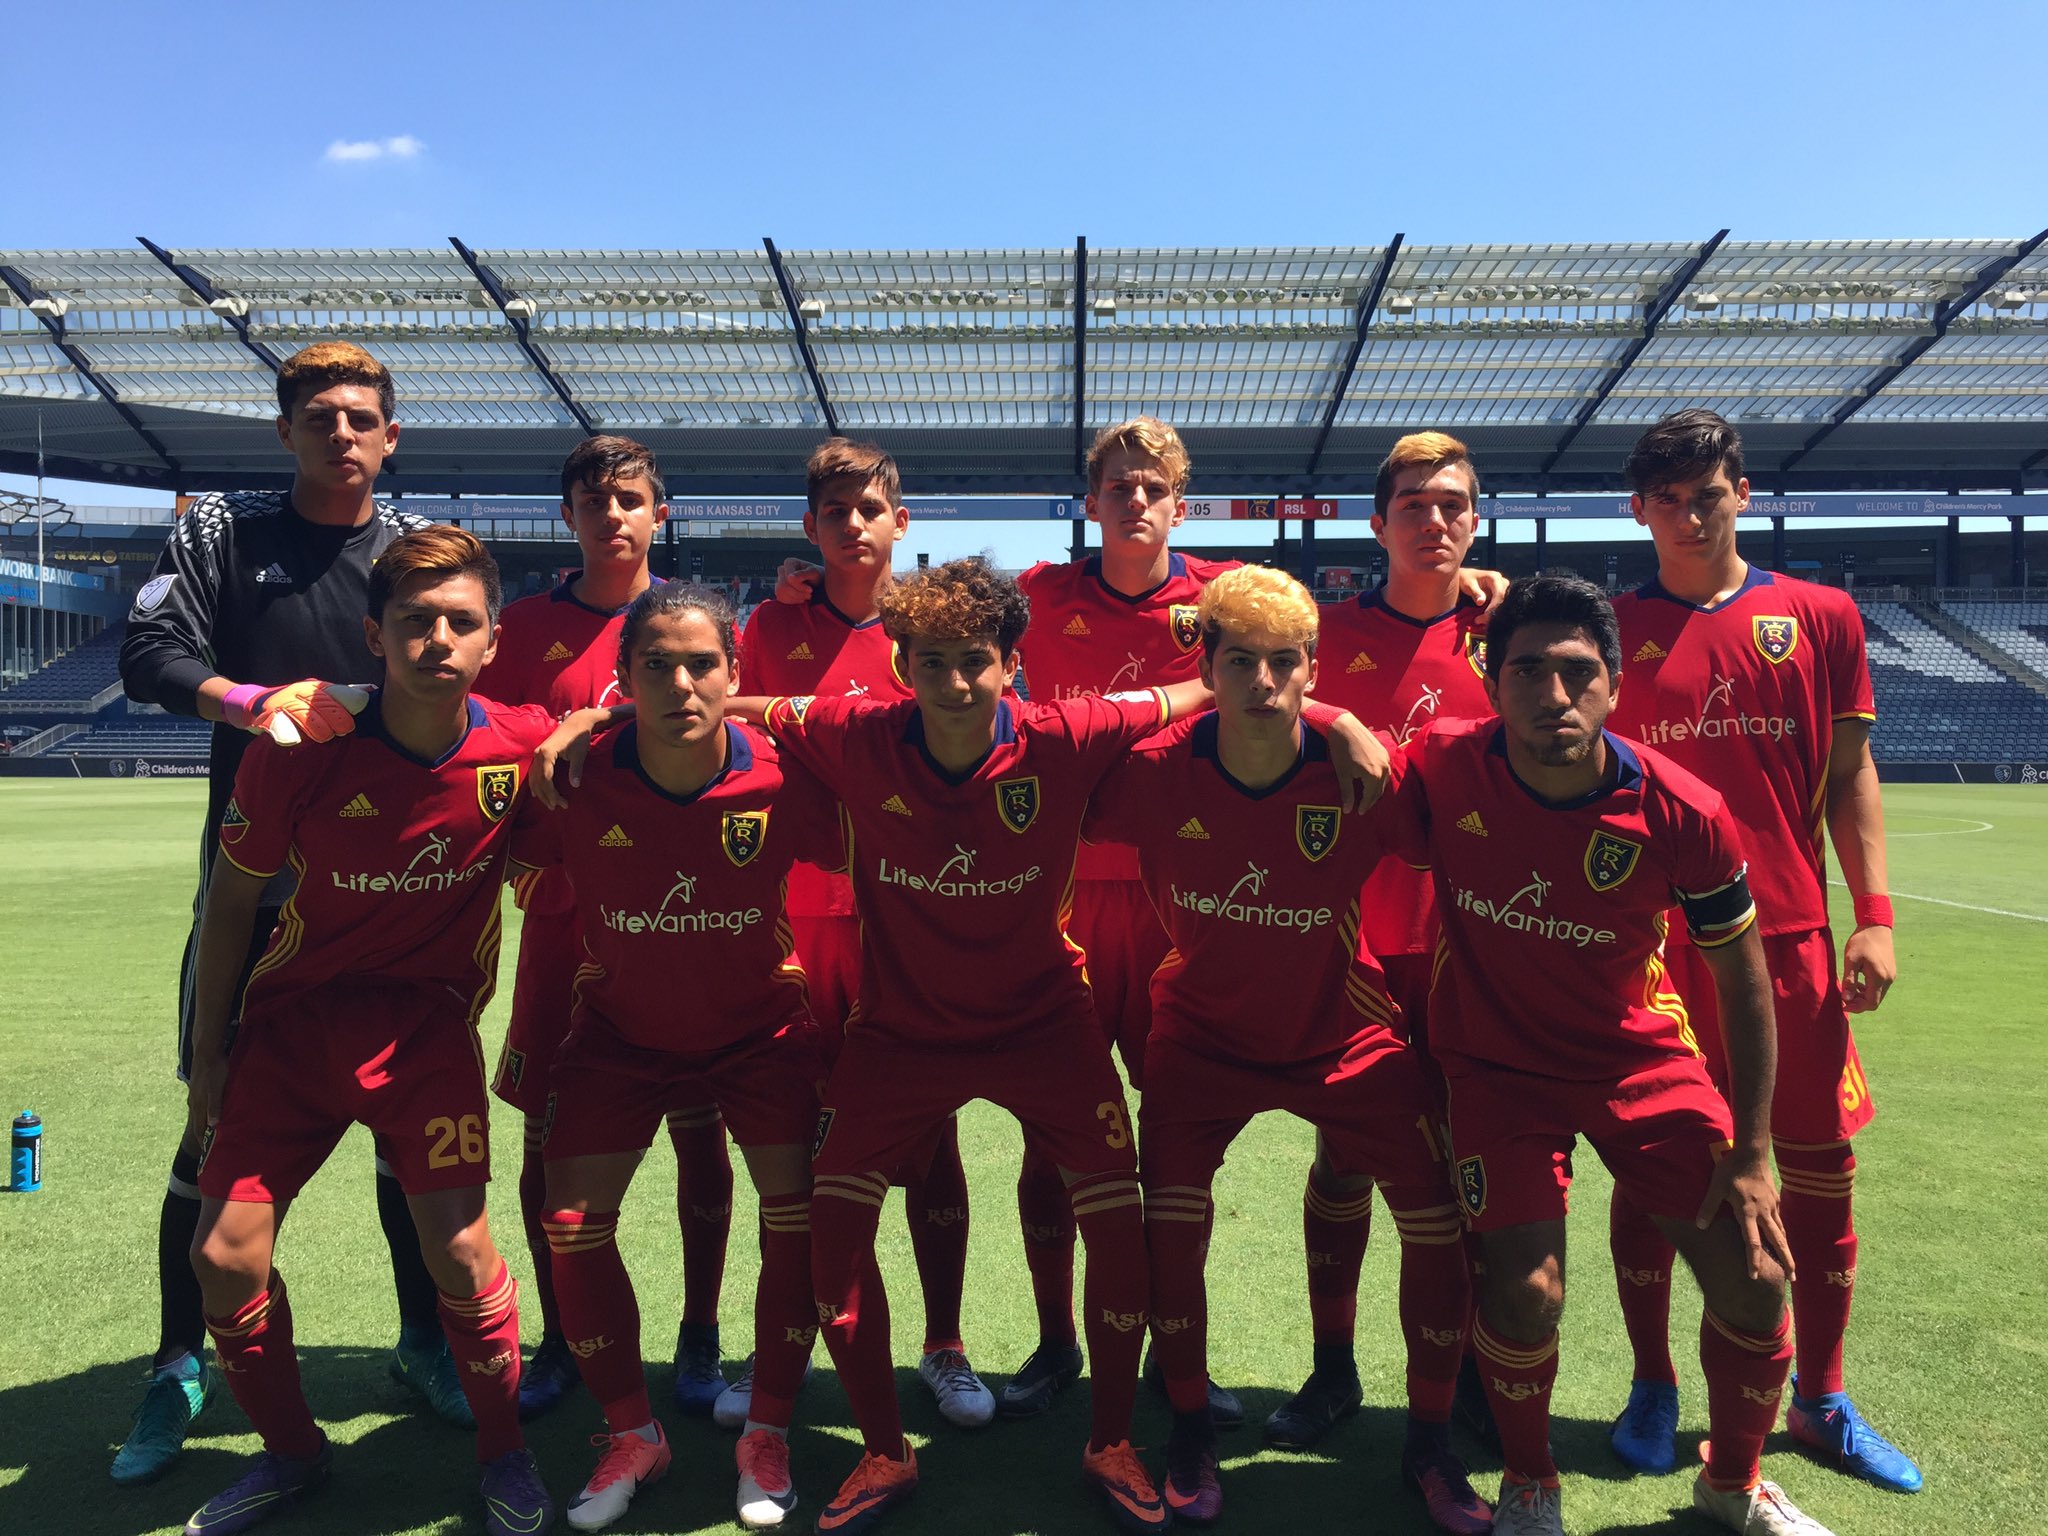 The Real Salt Lake Under-16 team, Julian Vazquez's team while he was at the academy, photographed in 2017. (Real Salt Lake)